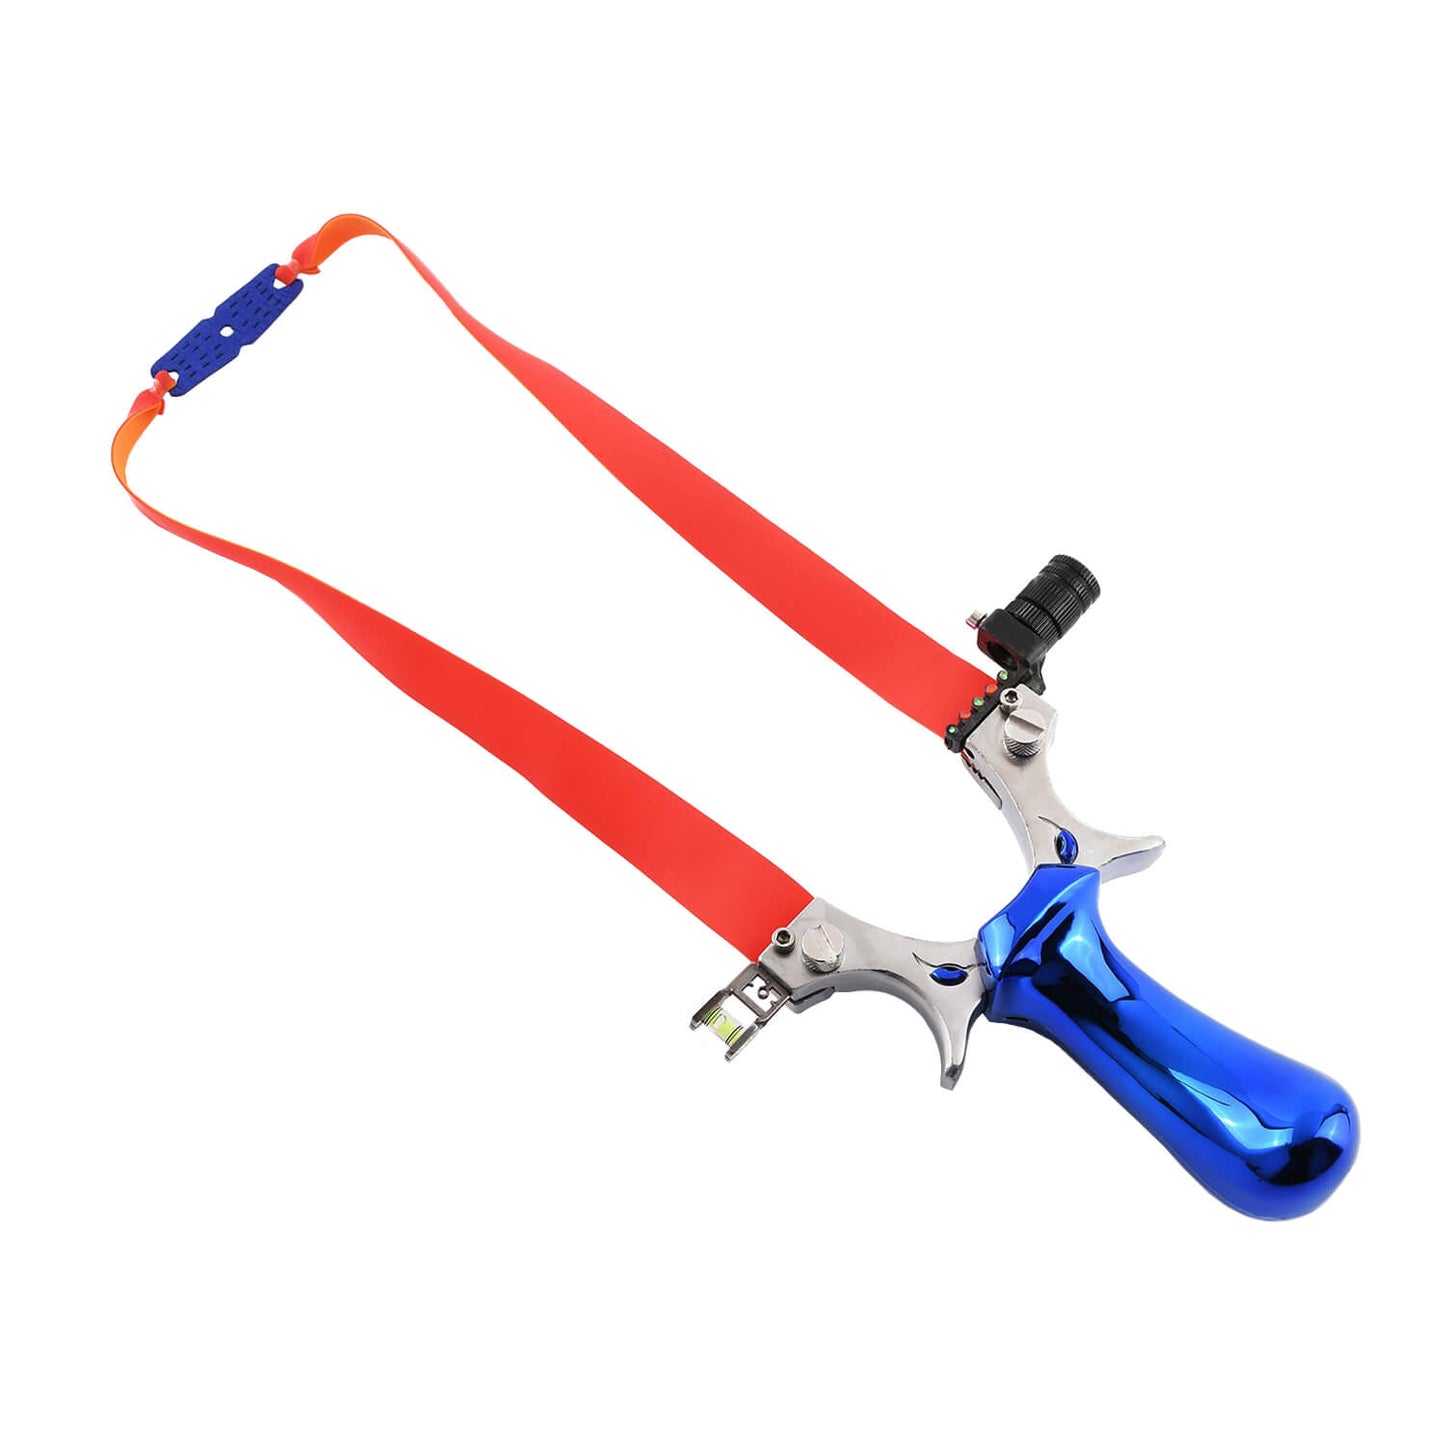 Ballista 24 blue tactical slingshot featuring a leveling instrument for precise aiming, and 3 LR41 batteries.